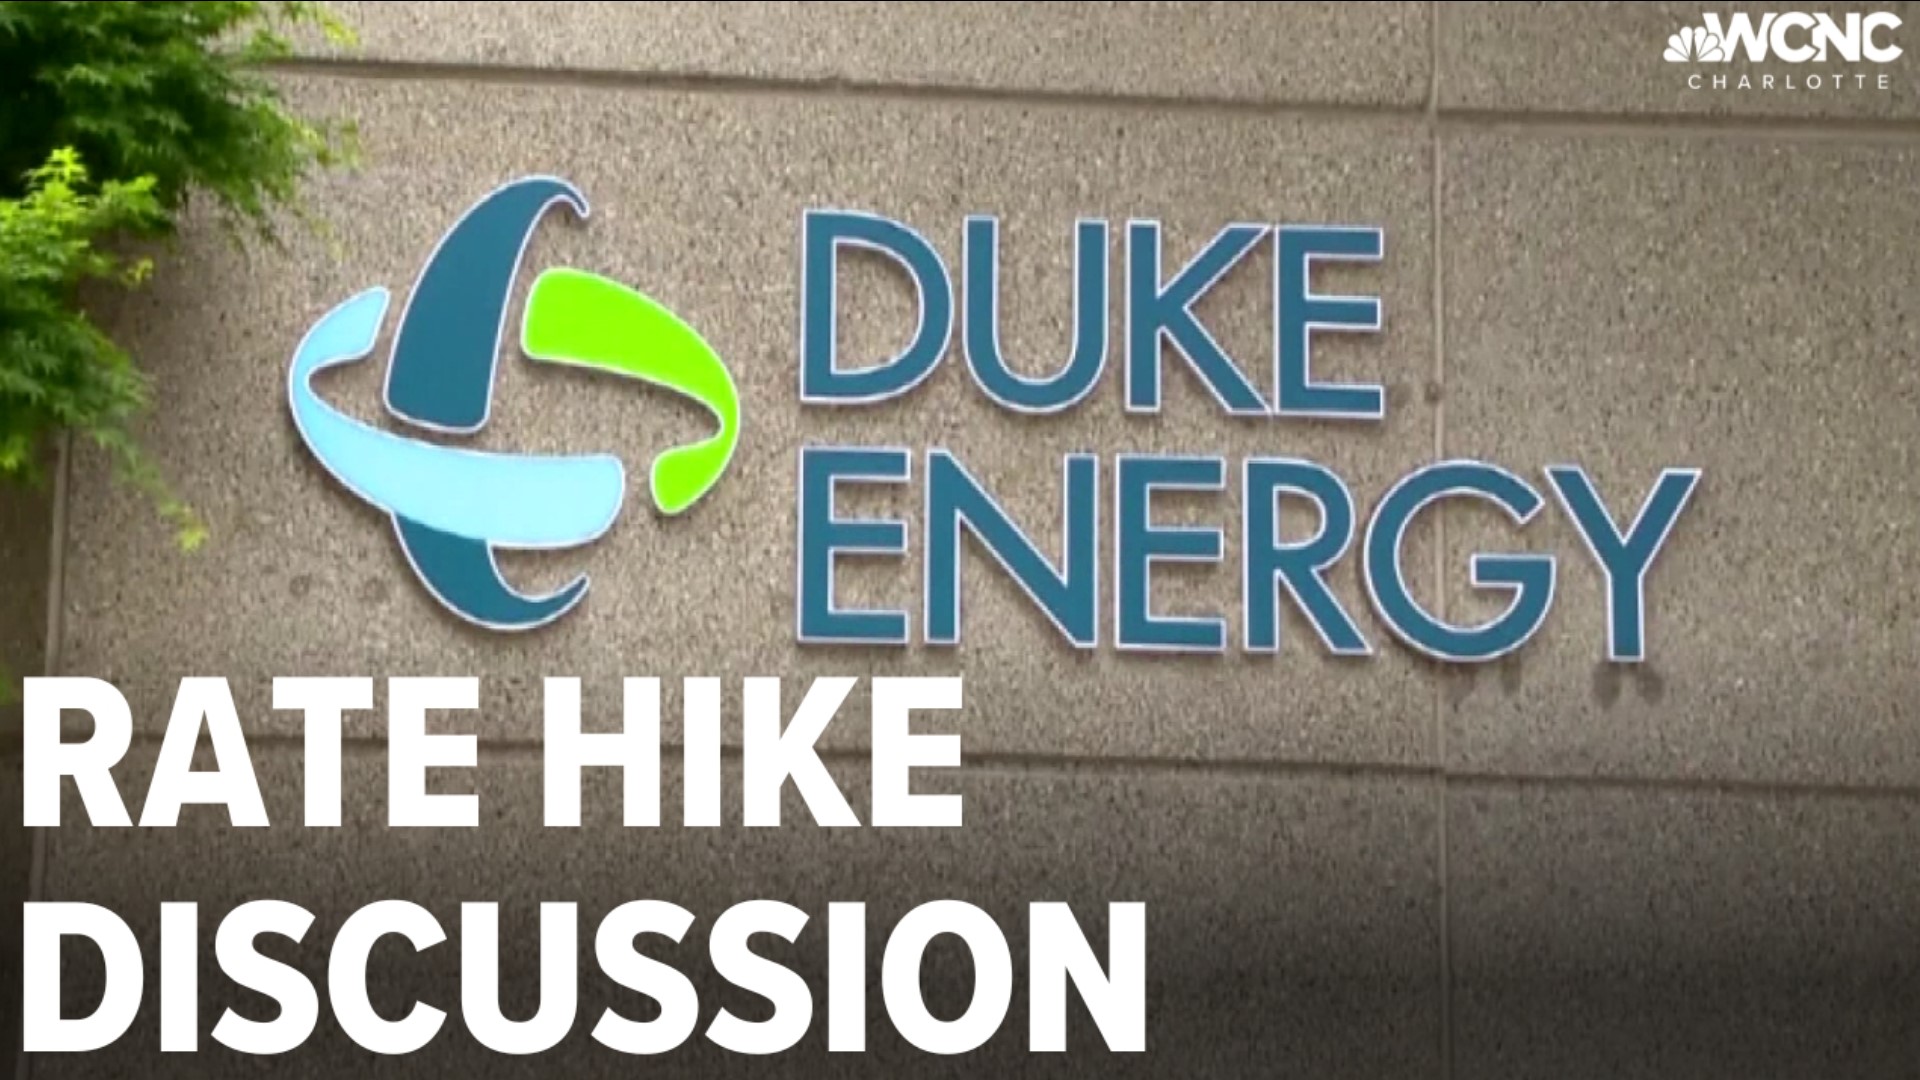 Duke Energy plans to raise electricity rates in North Carolina